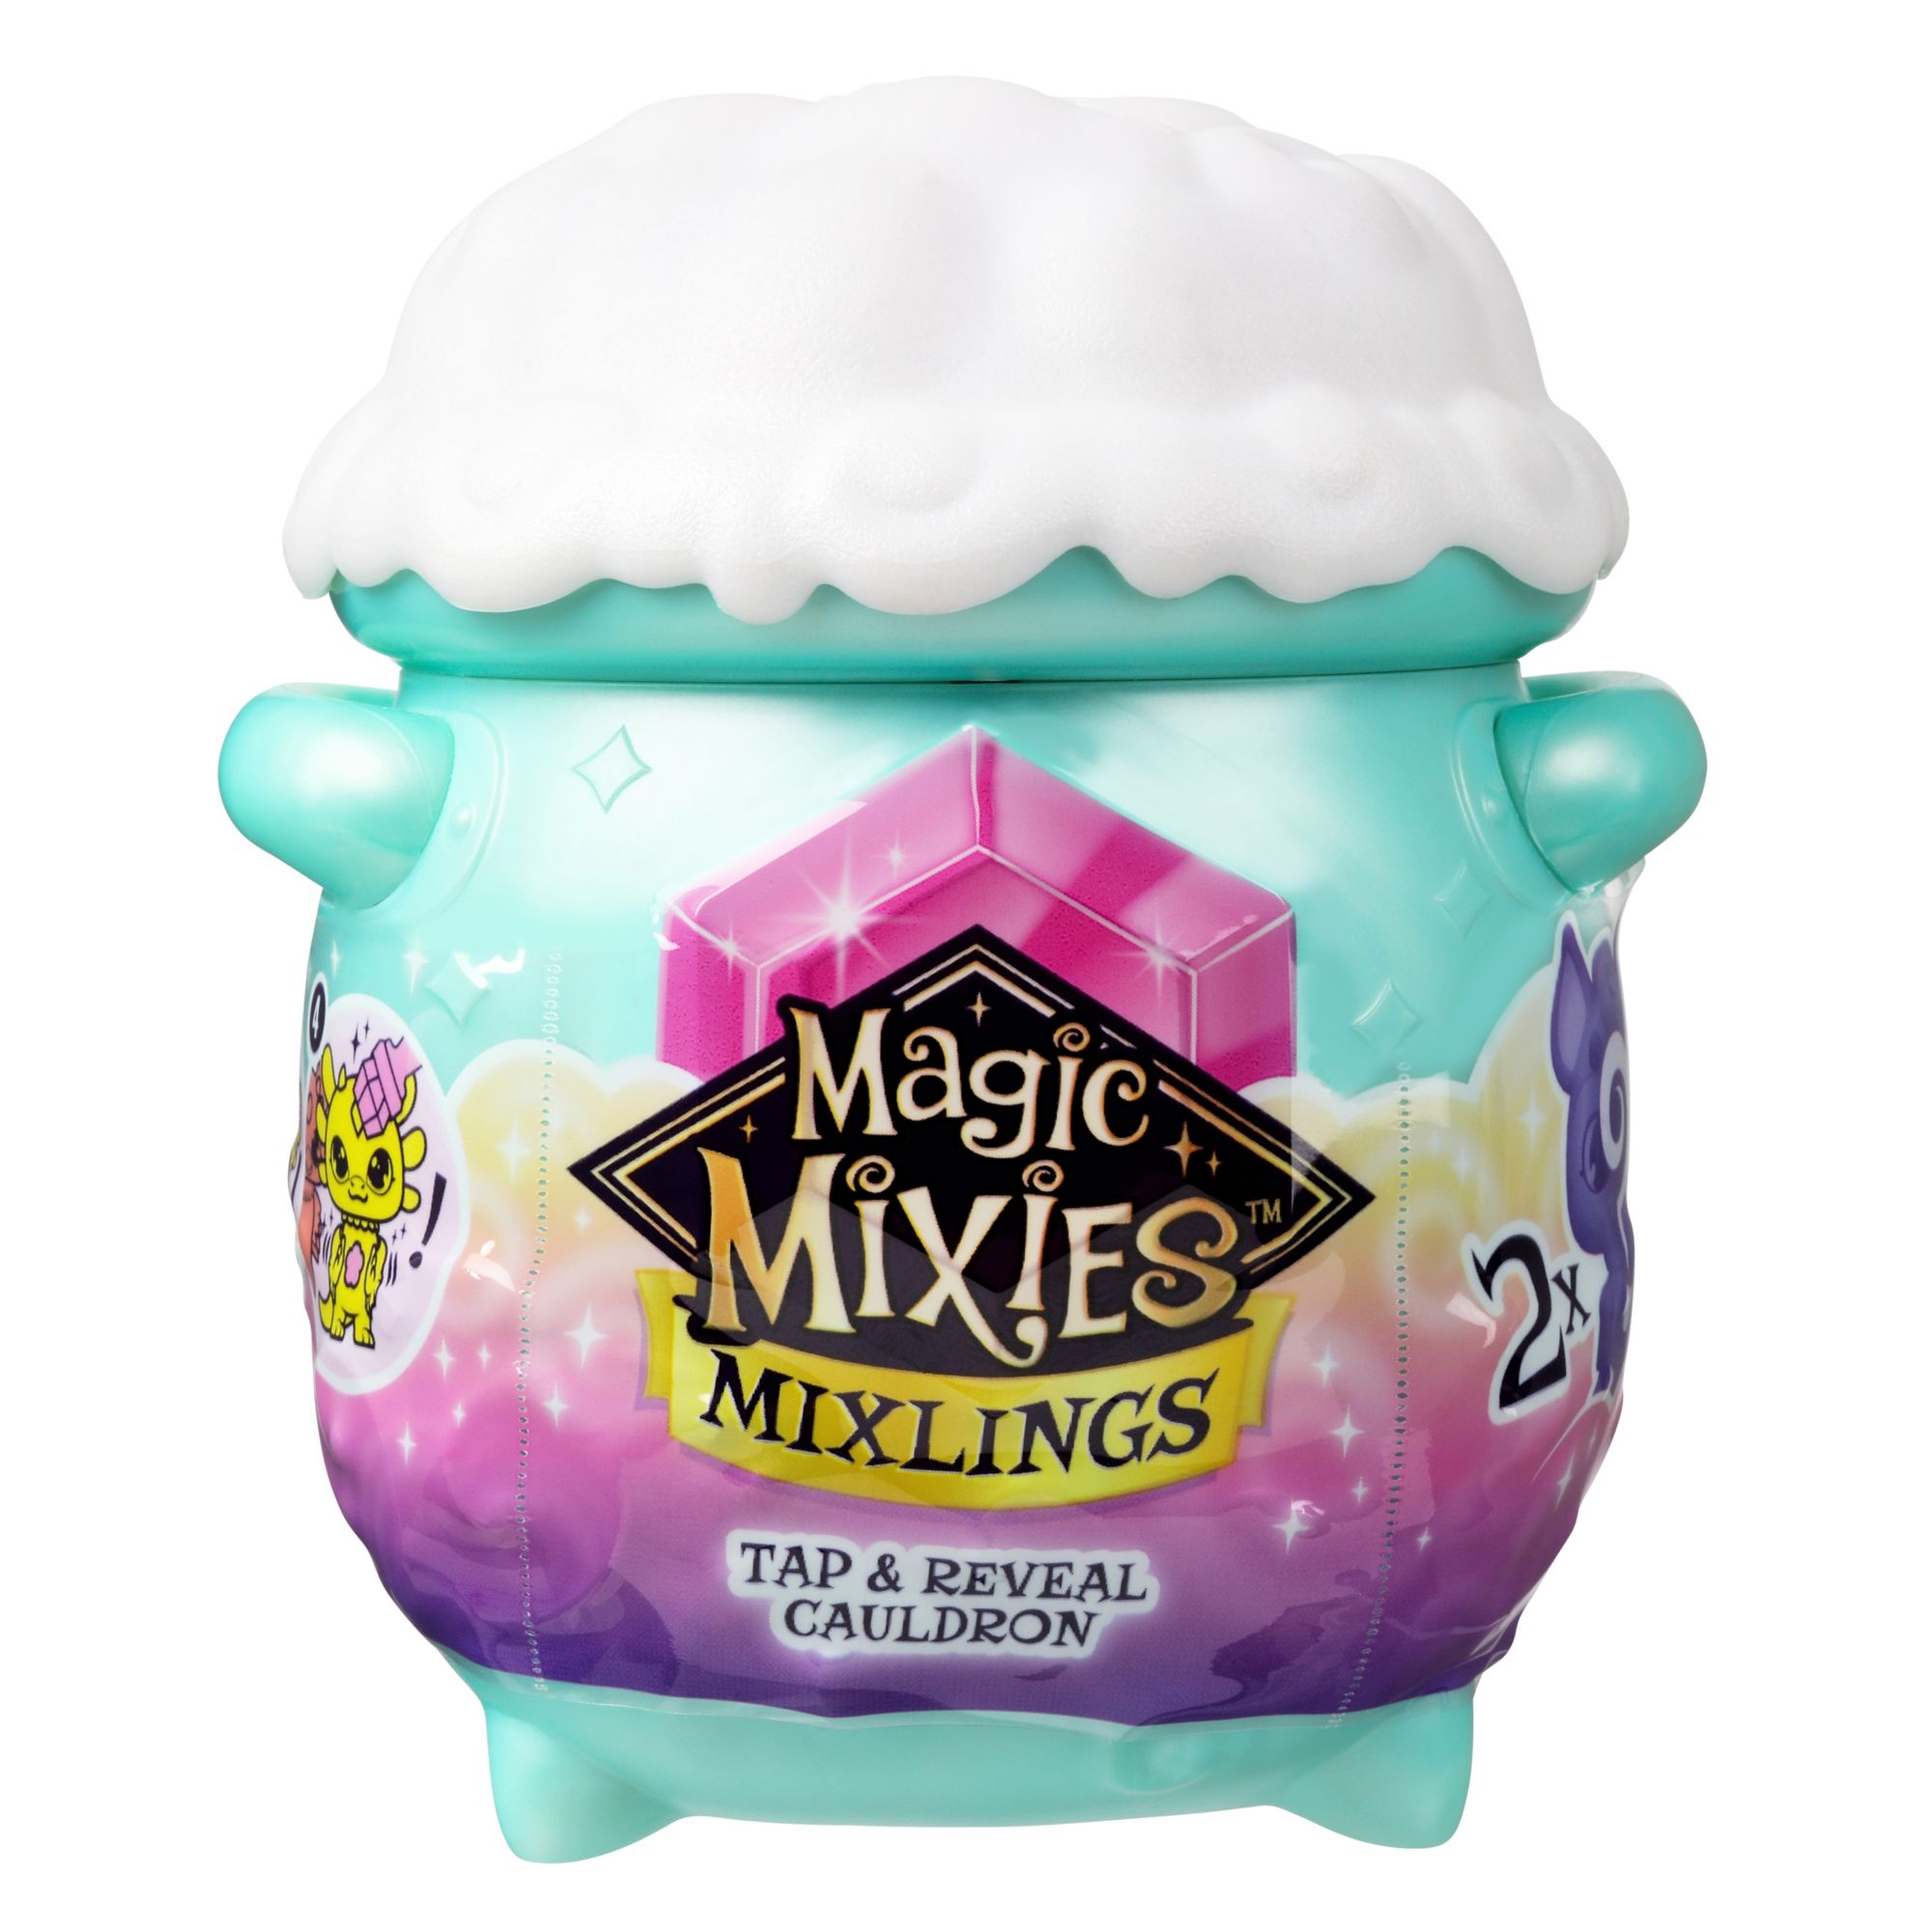 Magic Mixies In Stock! Best Sales and Prices Here!